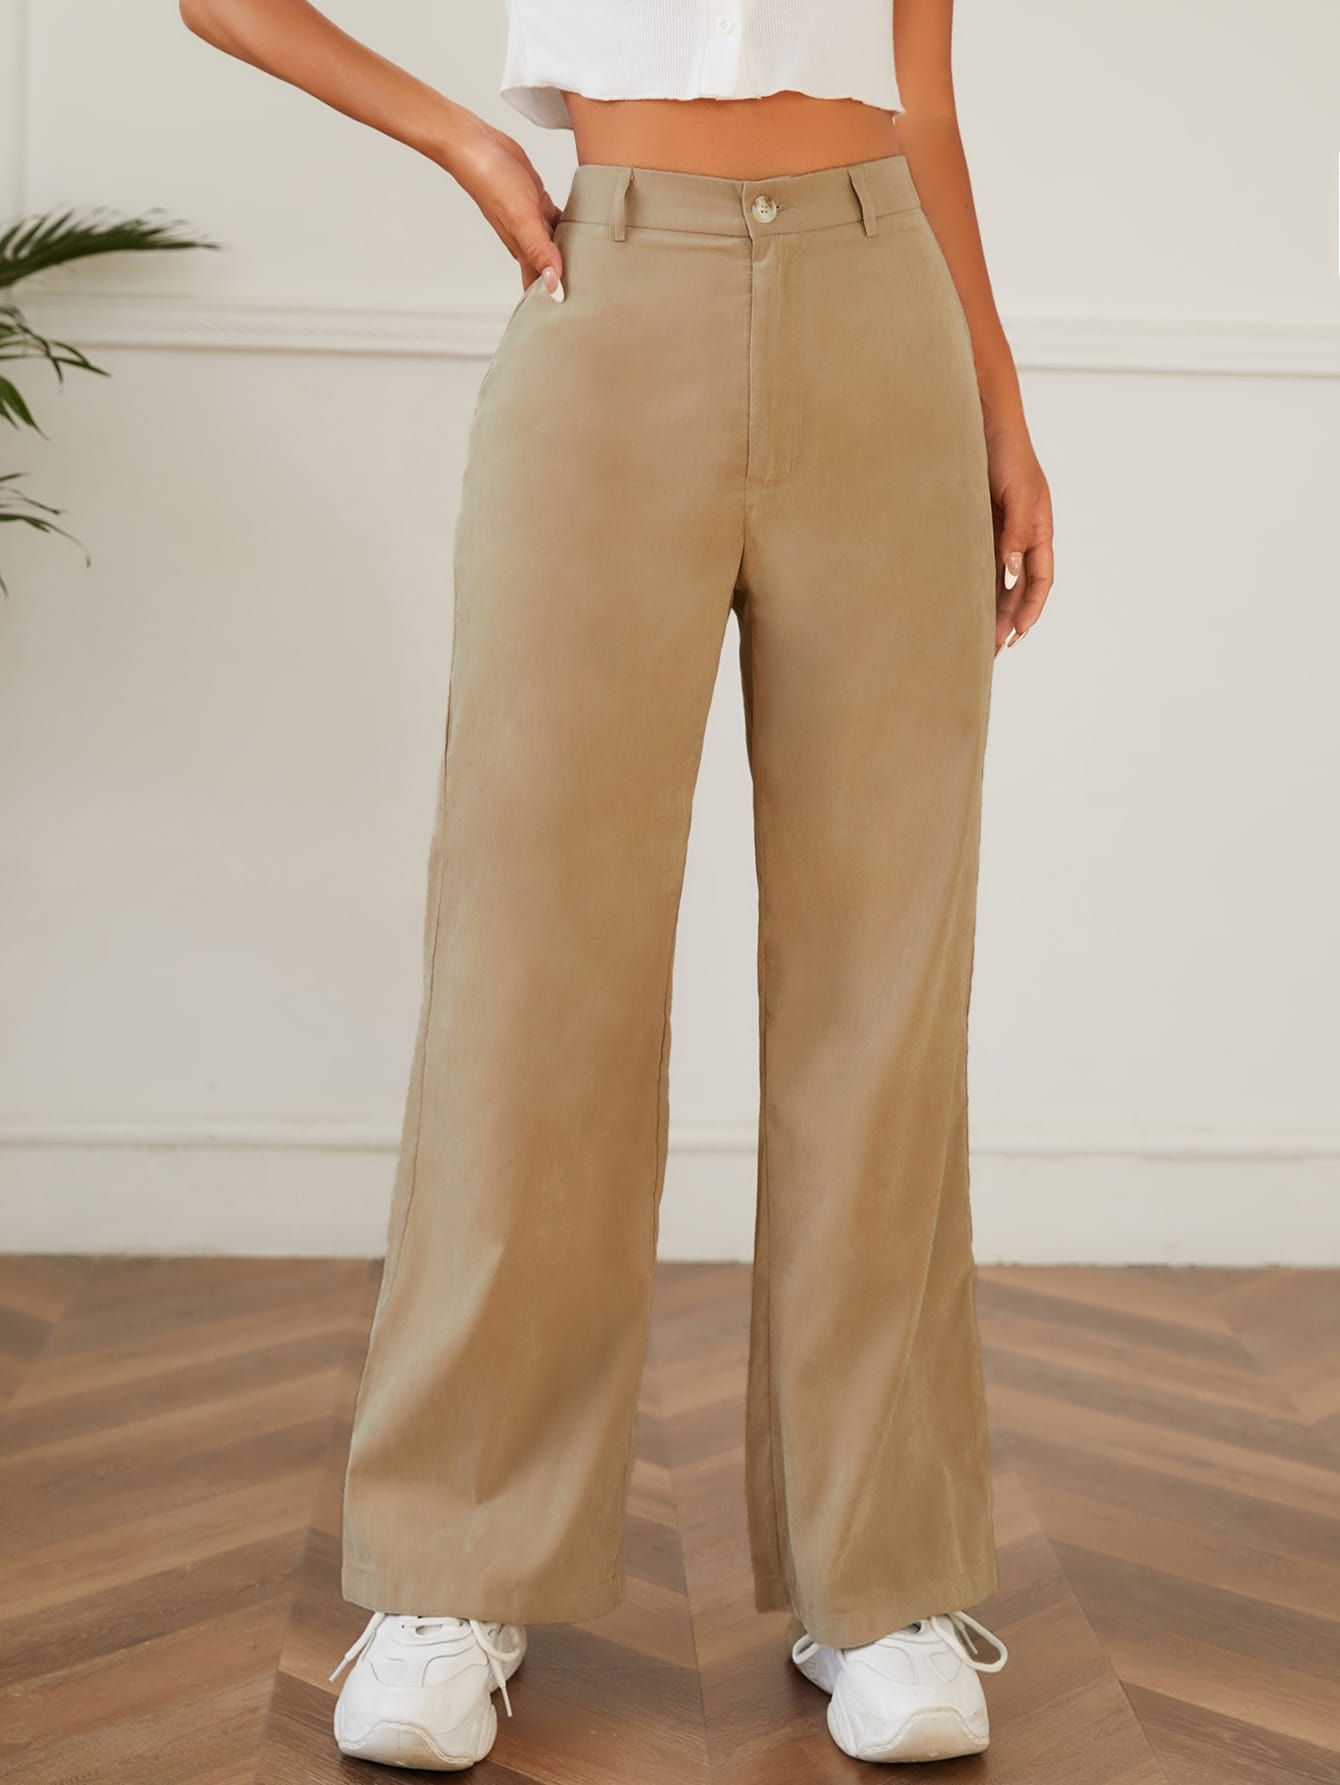 How to Style Khaki Dress Pants: Top 15 Stylish & Elegant Outfit Ideas for Women